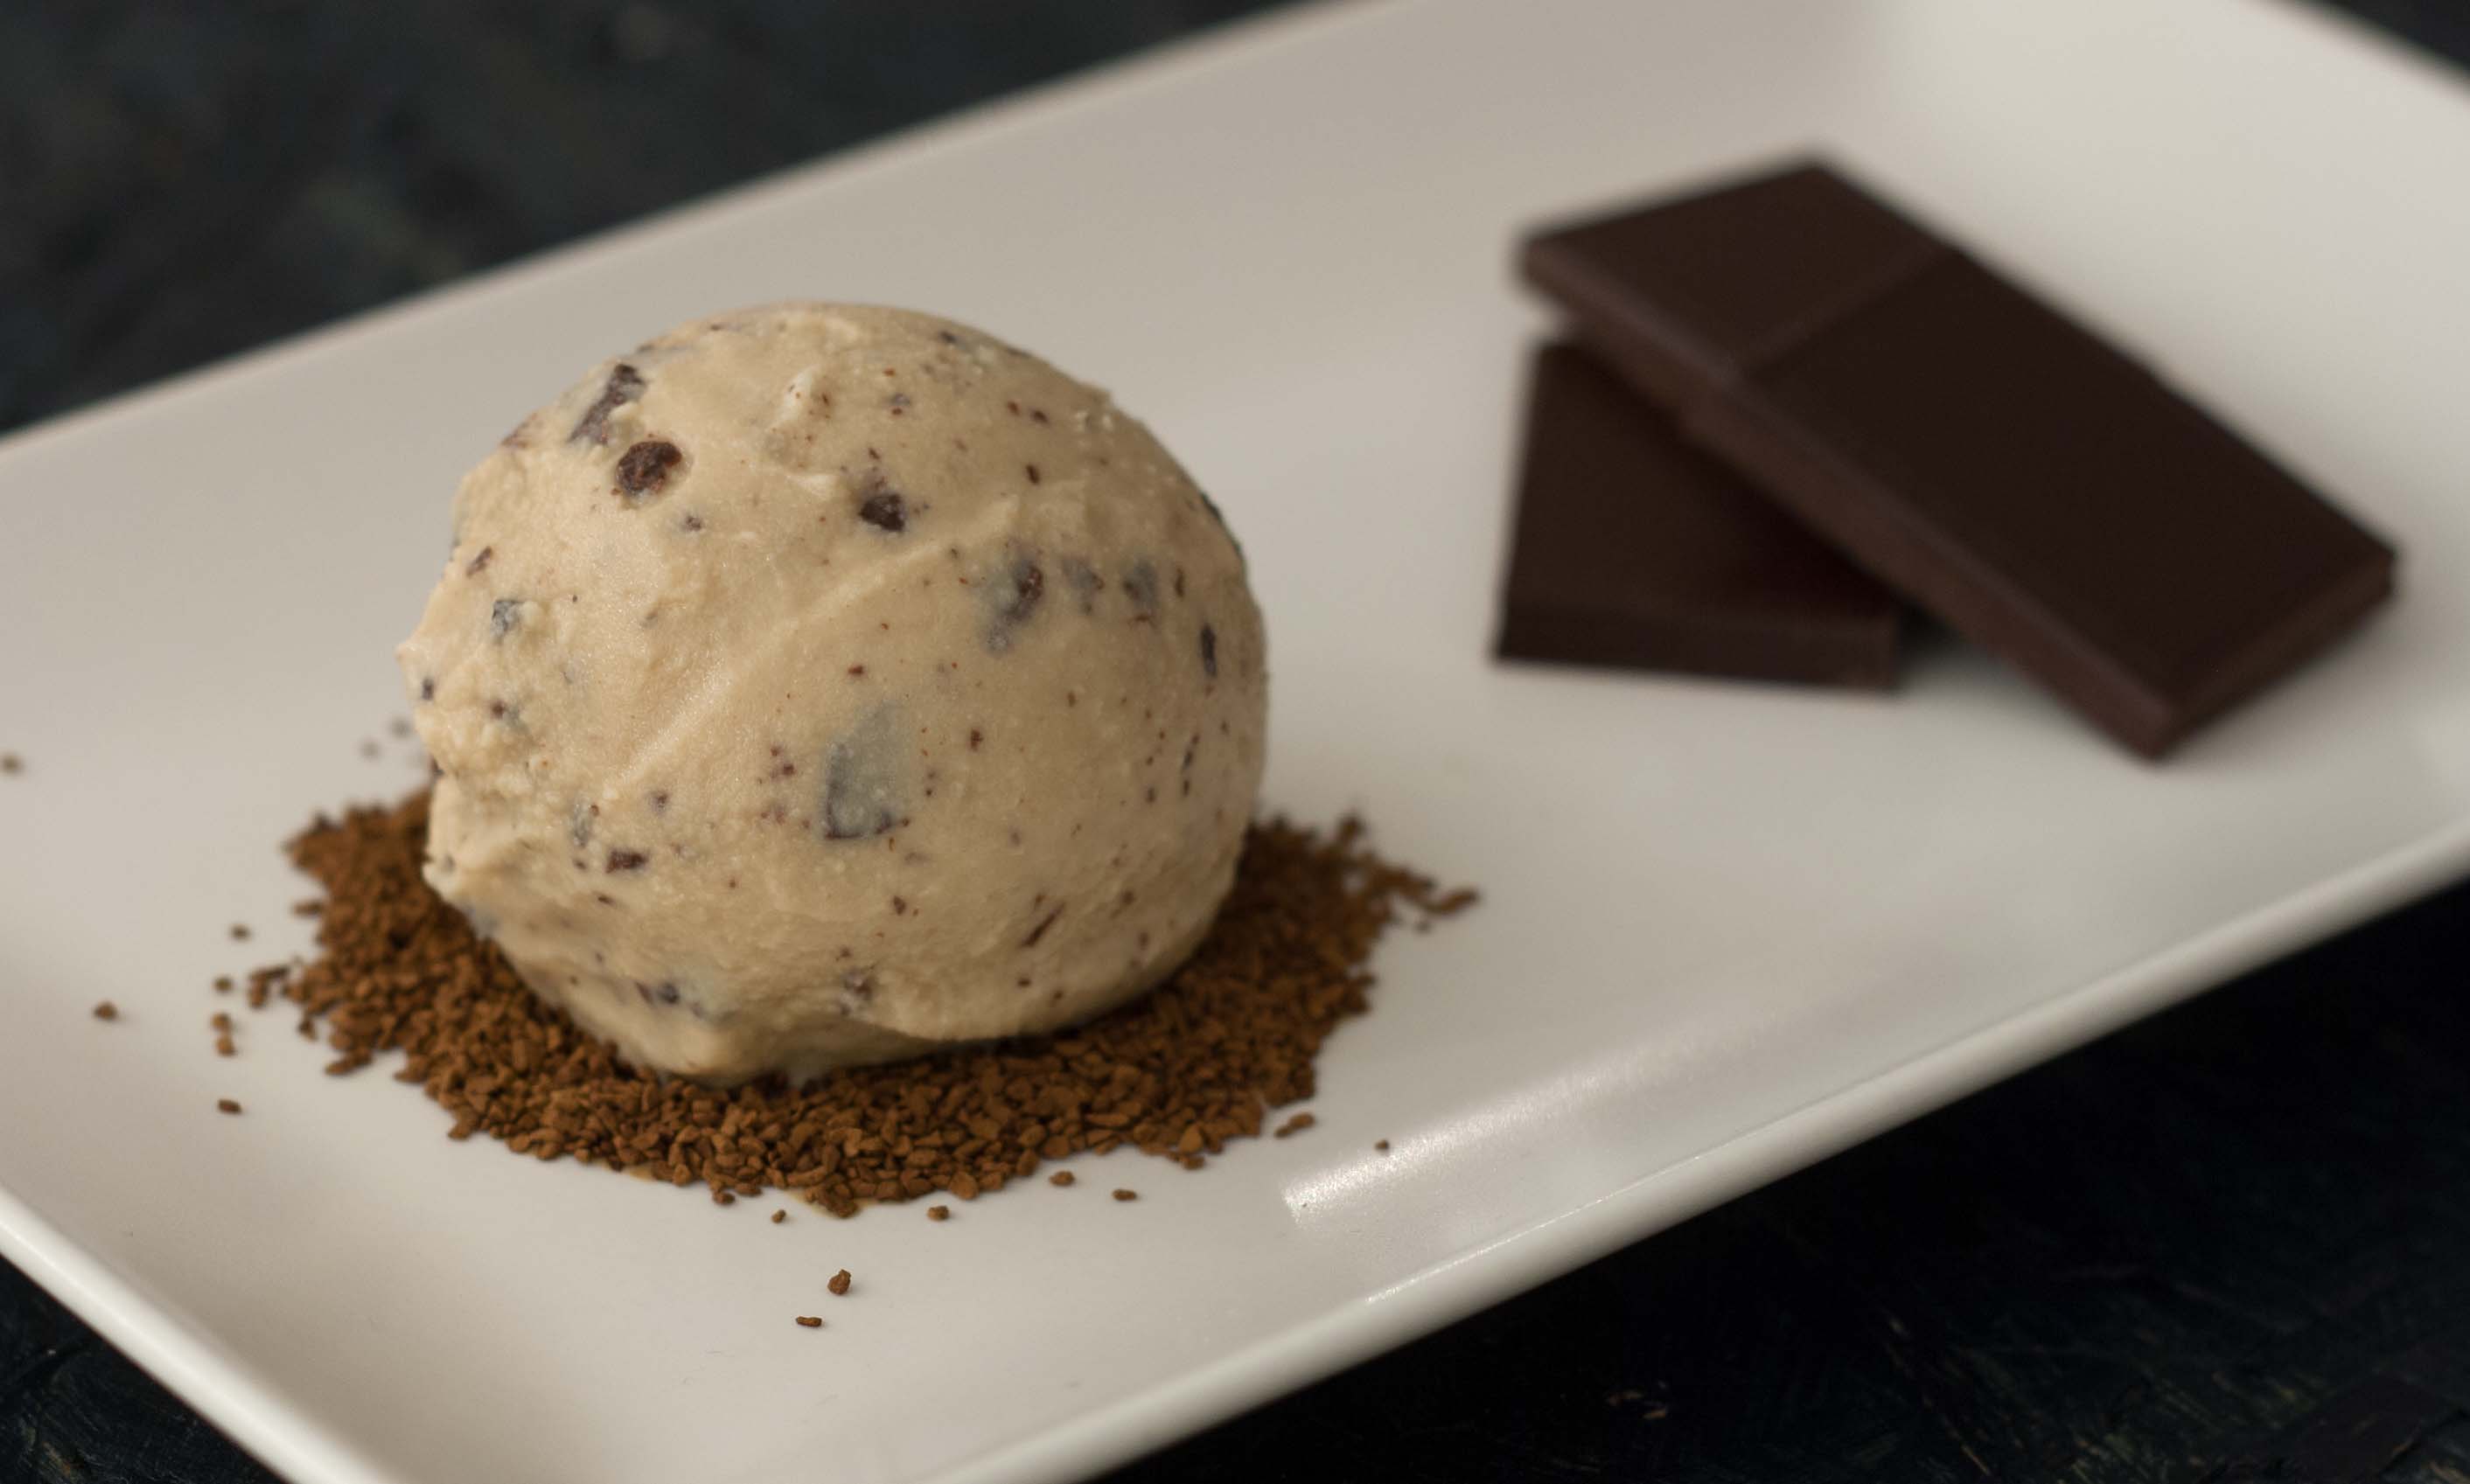 Recipe for Homemade Coffee Ice Cream with Chocolate Pieces